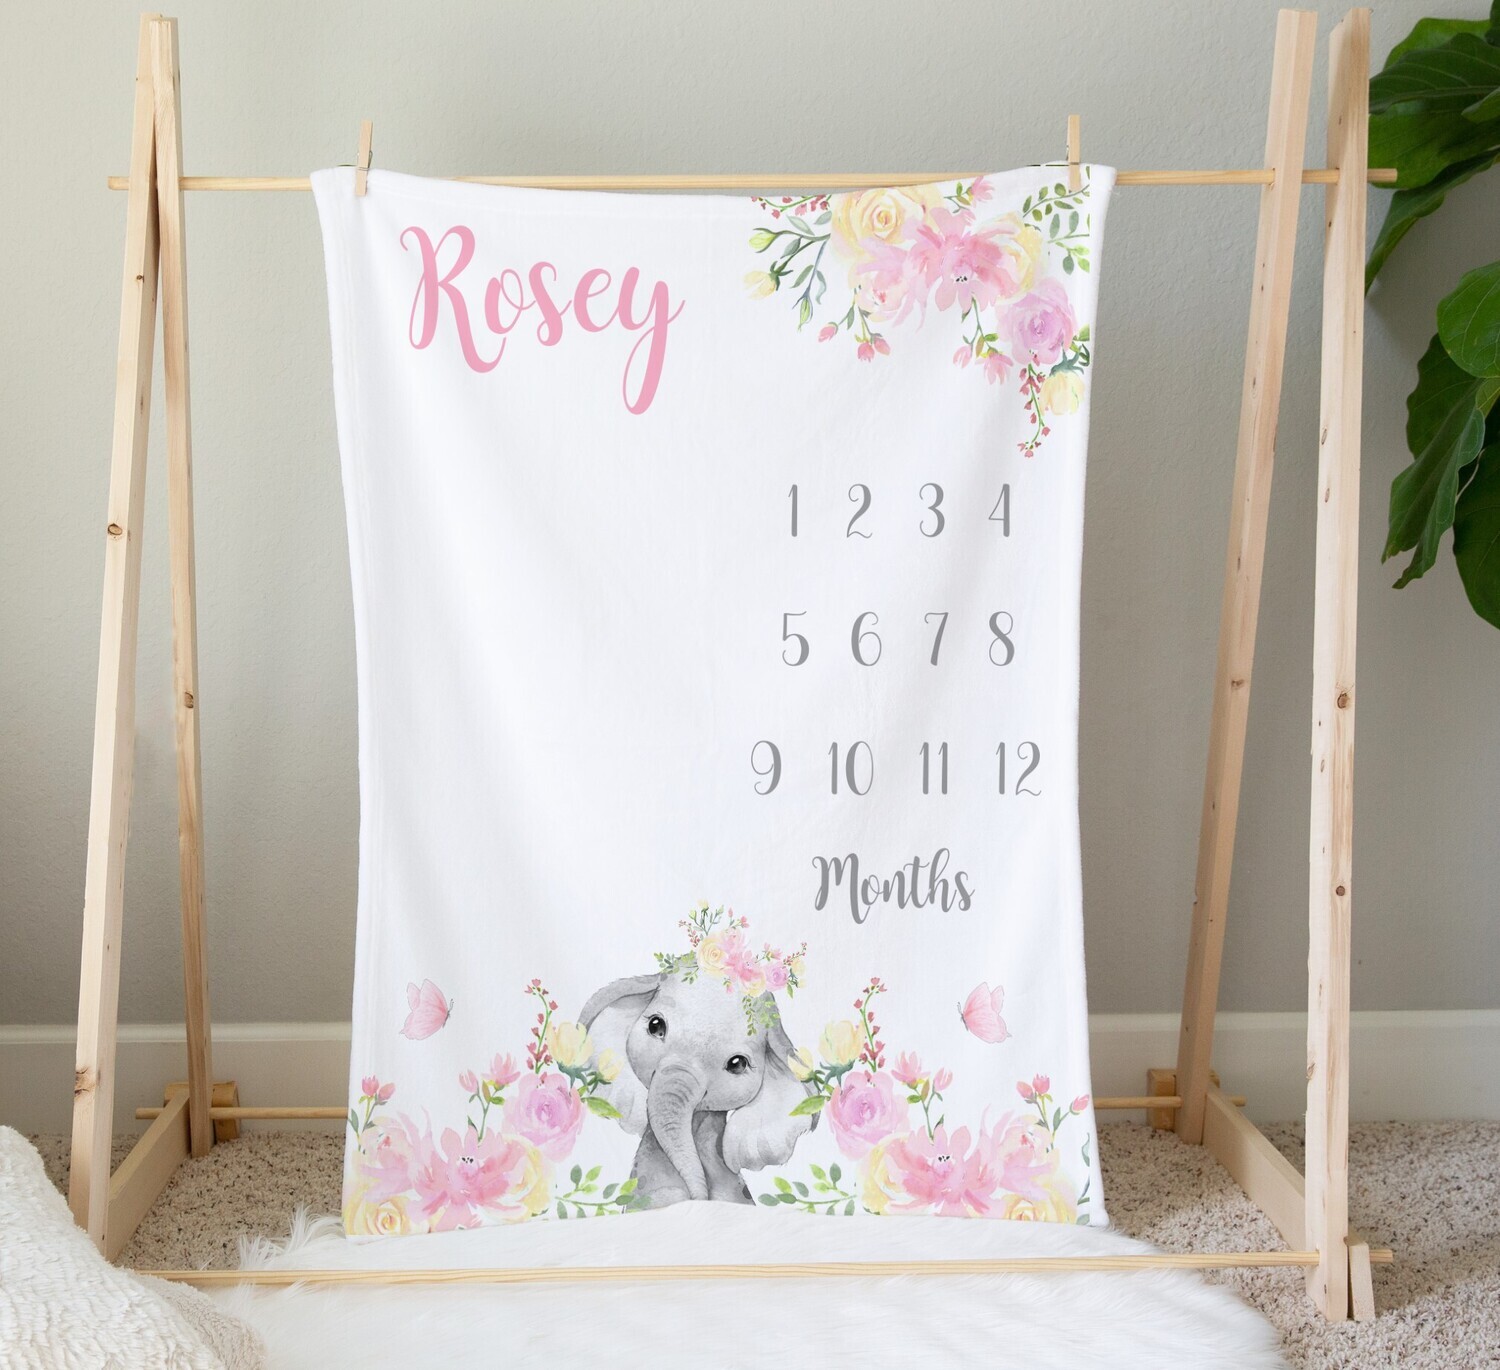 Milestone Baby Girl Blanket Personalized Monthly Baby Blanket Pink Floral Elephant New Baby Shower Gift Baby Photo Op Backdrop